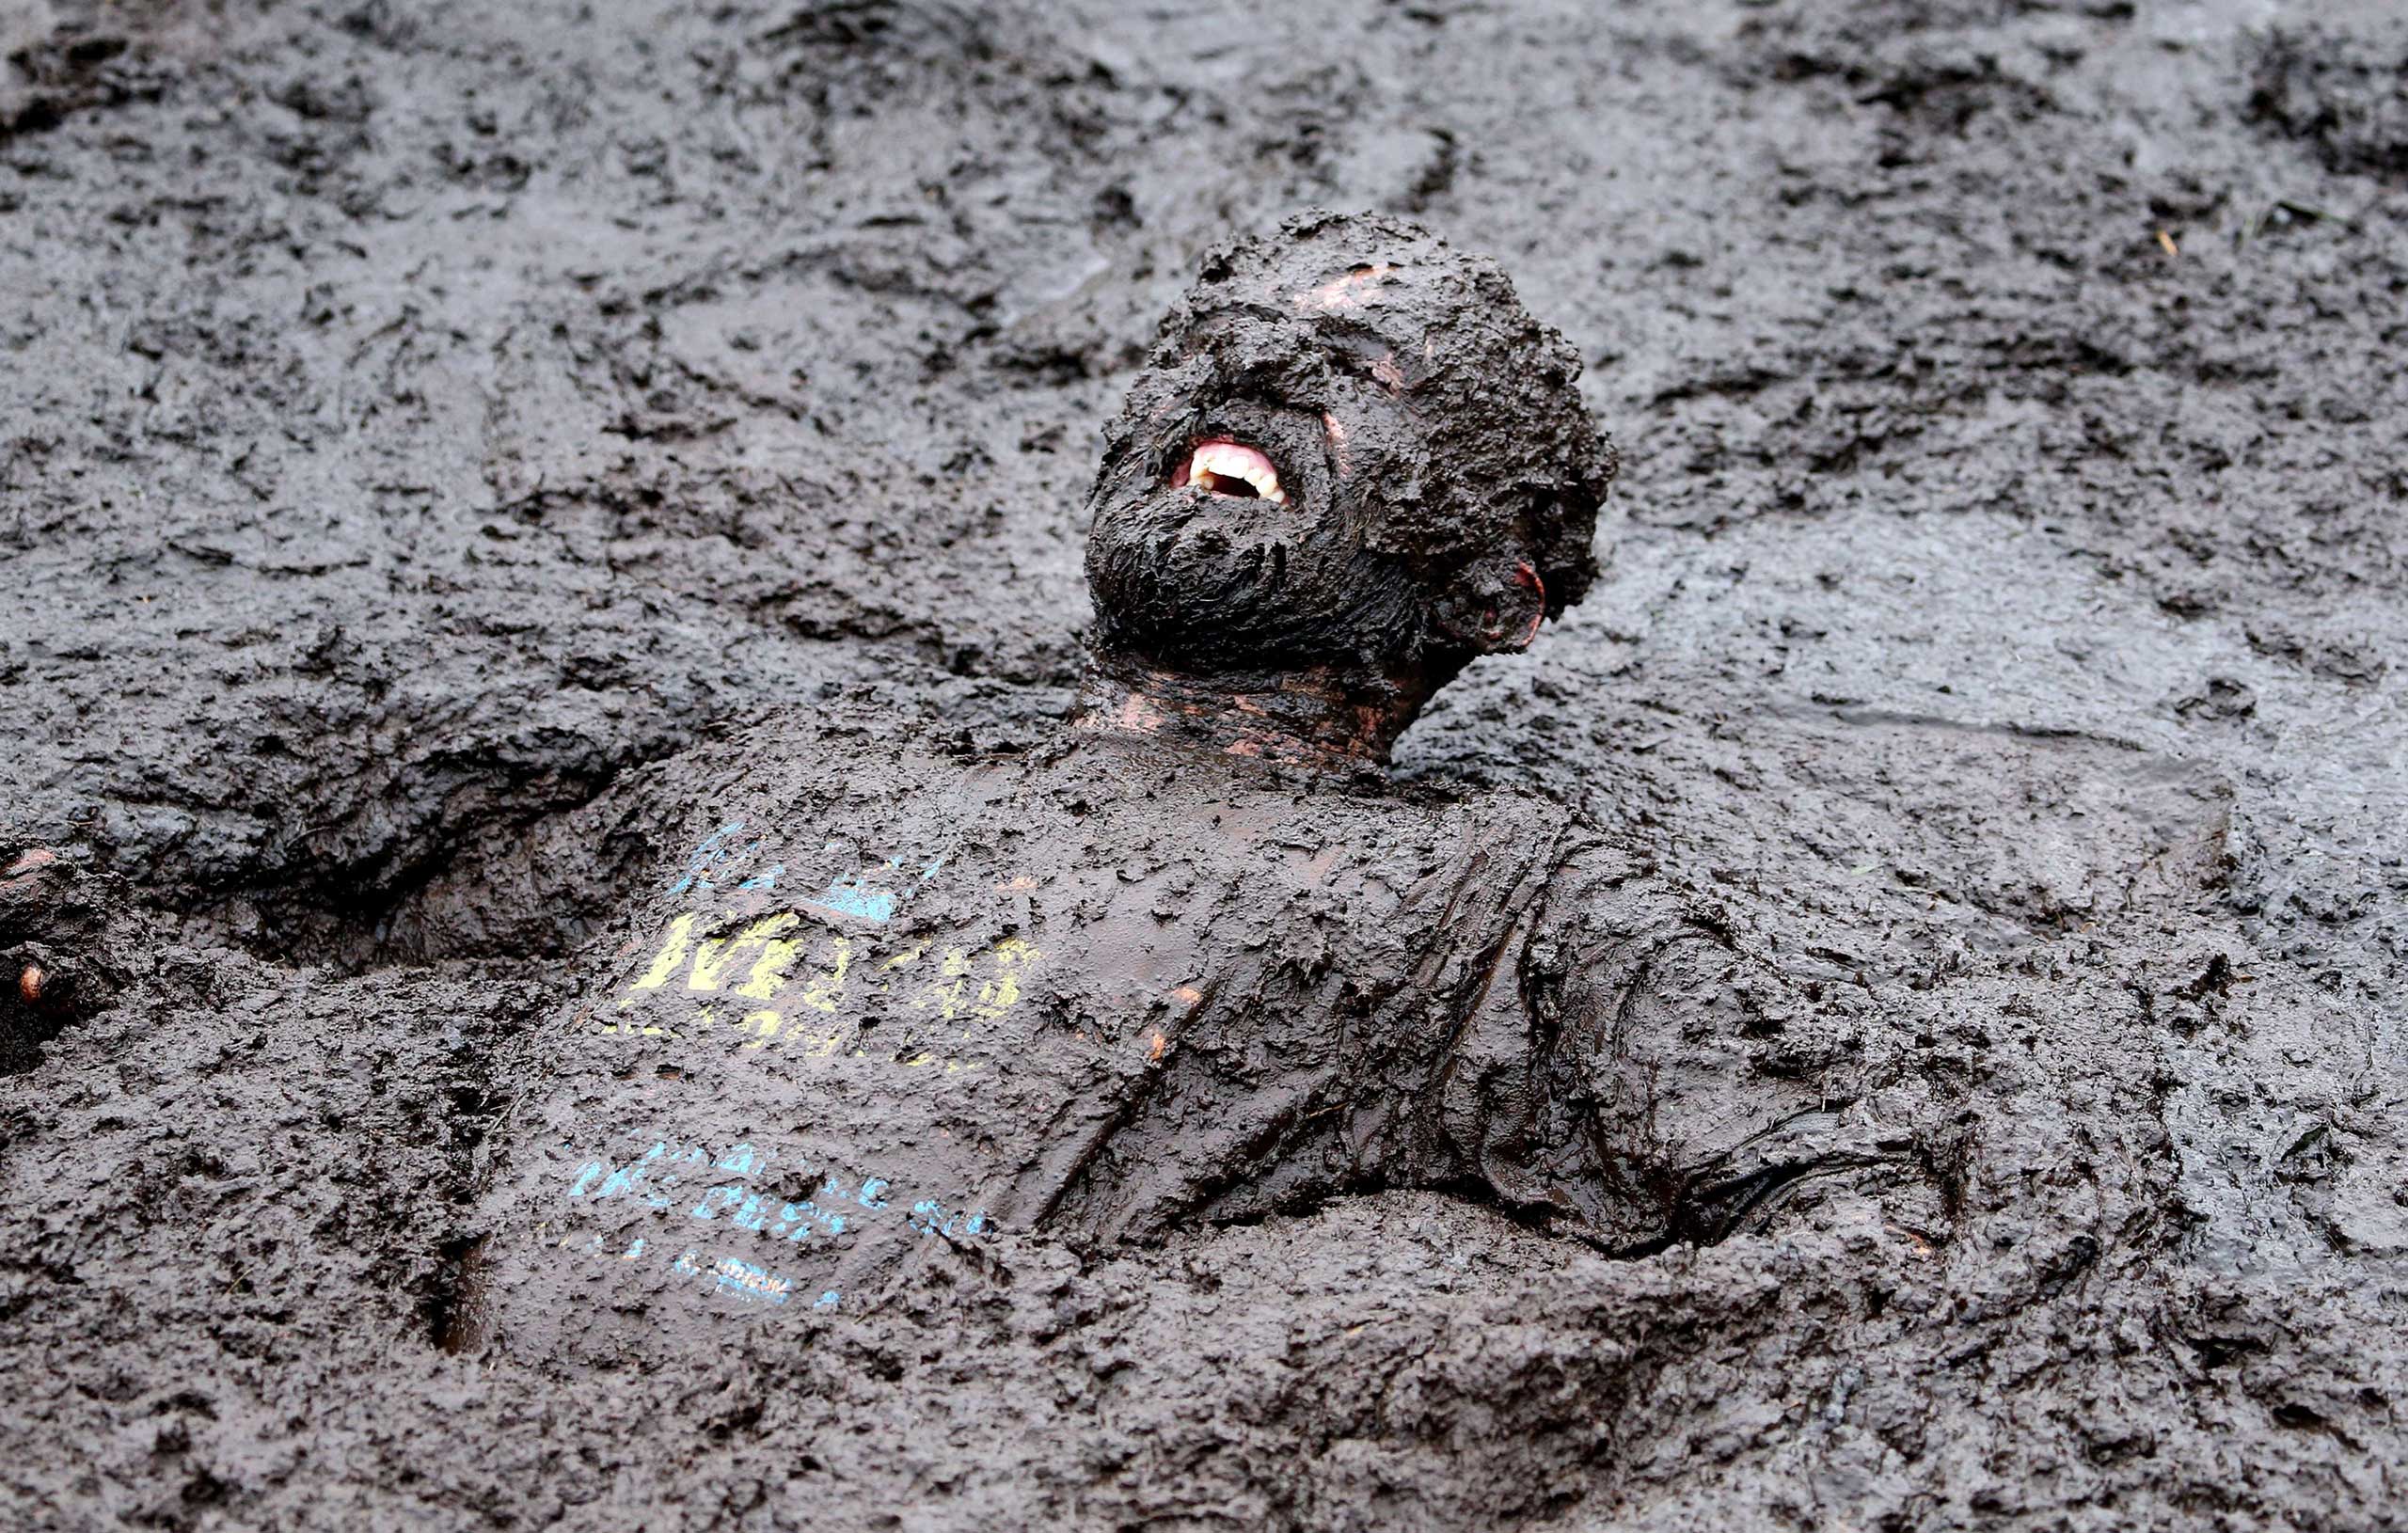 A competitor competes in the Mud Madness race, at Foymore Lodge in Portadown, County Armagh on Sept.14, 2014.